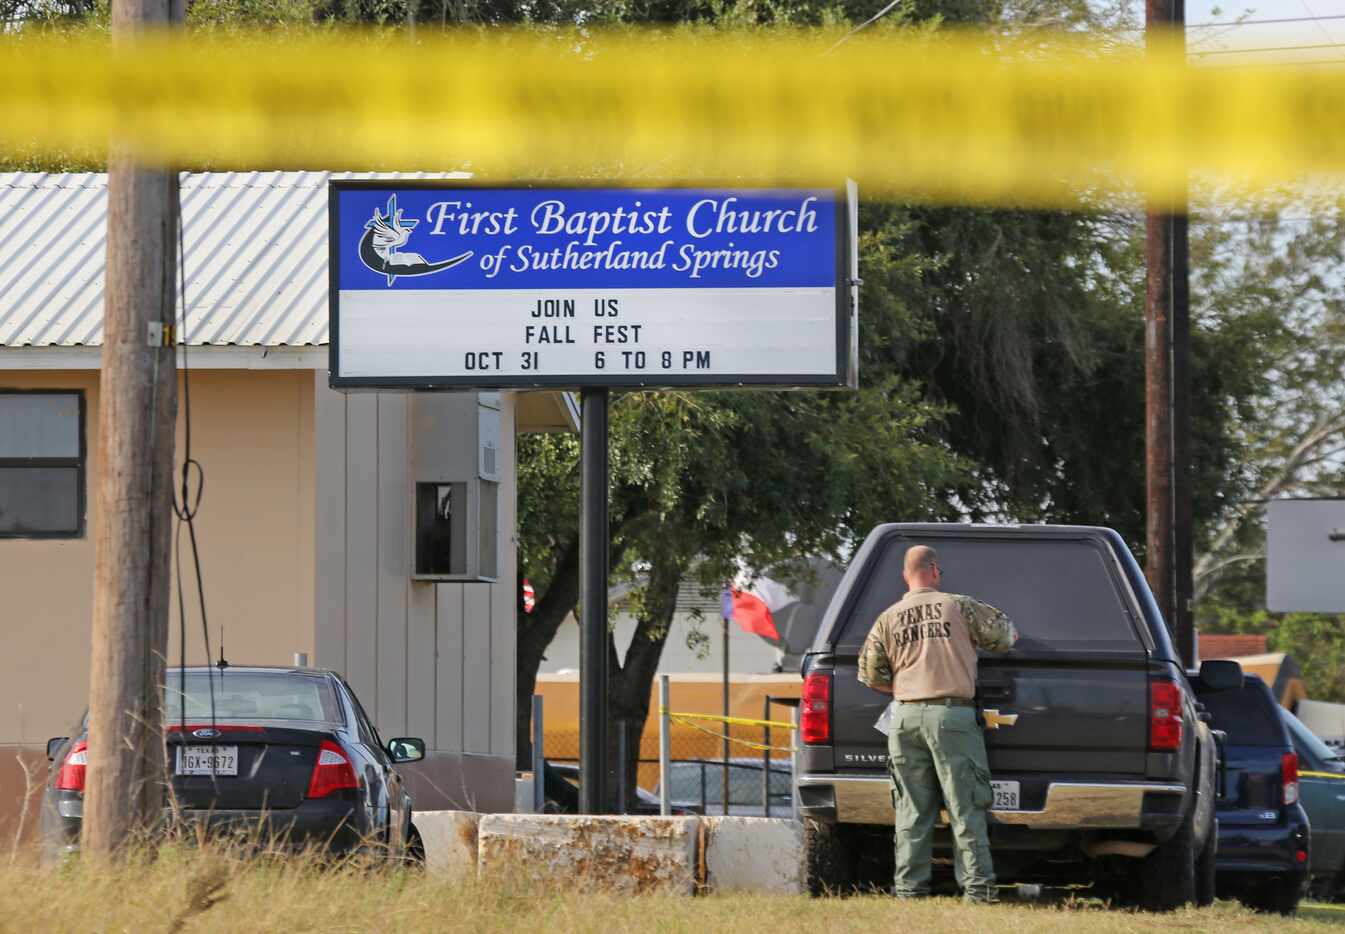 The investigation continues at the First Baptist Church of Sutherland Springs.